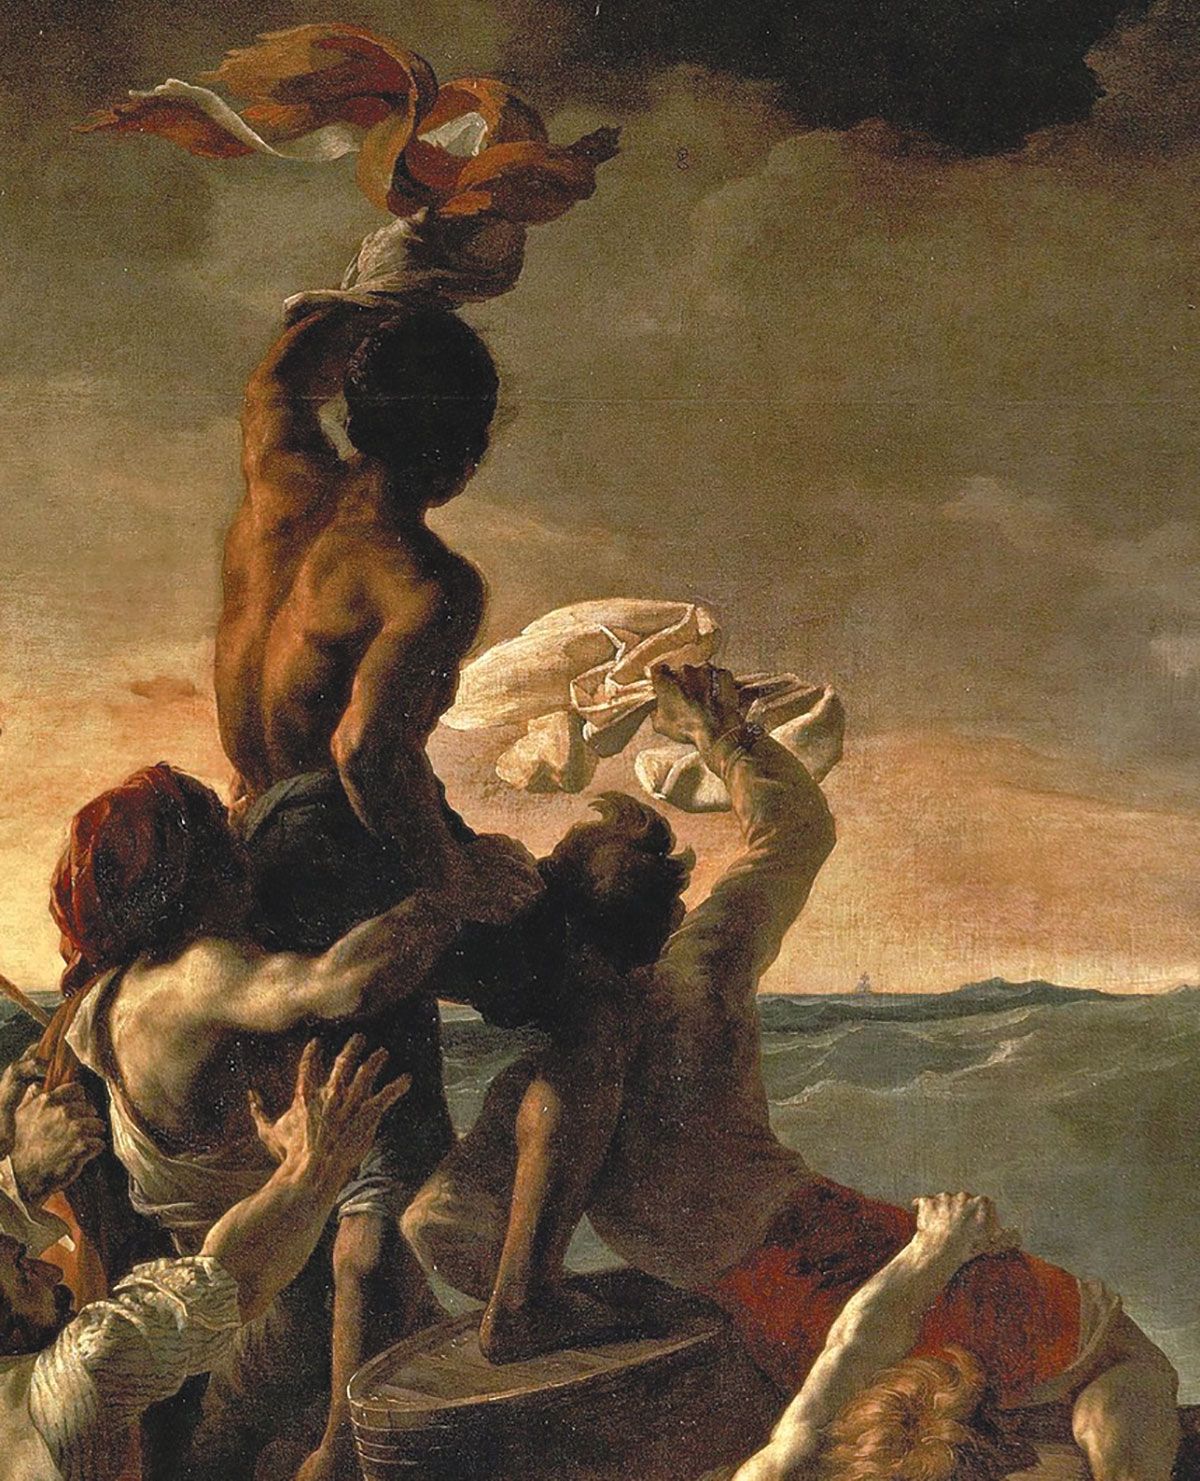 An epic of betrayal: detail from Théodore Géricault’s The Raft of the Medusa (1819) Courtesy of the Louvre, Paris